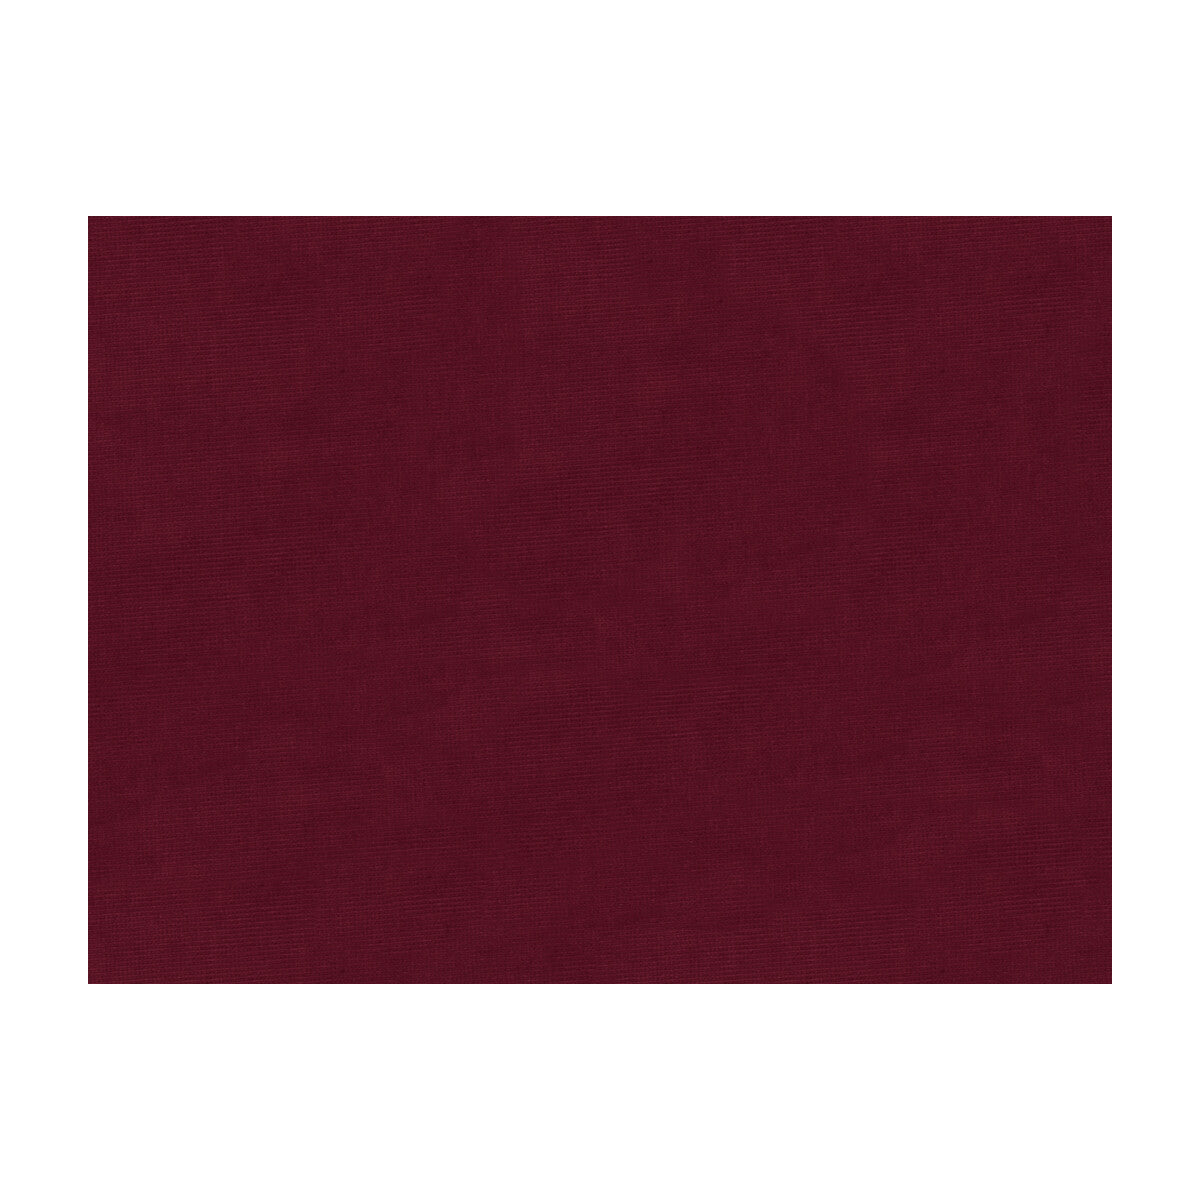 Charmant Velvet fabric in wine color - pattern 8013150.9.0 - by Brunschwig &amp; Fils